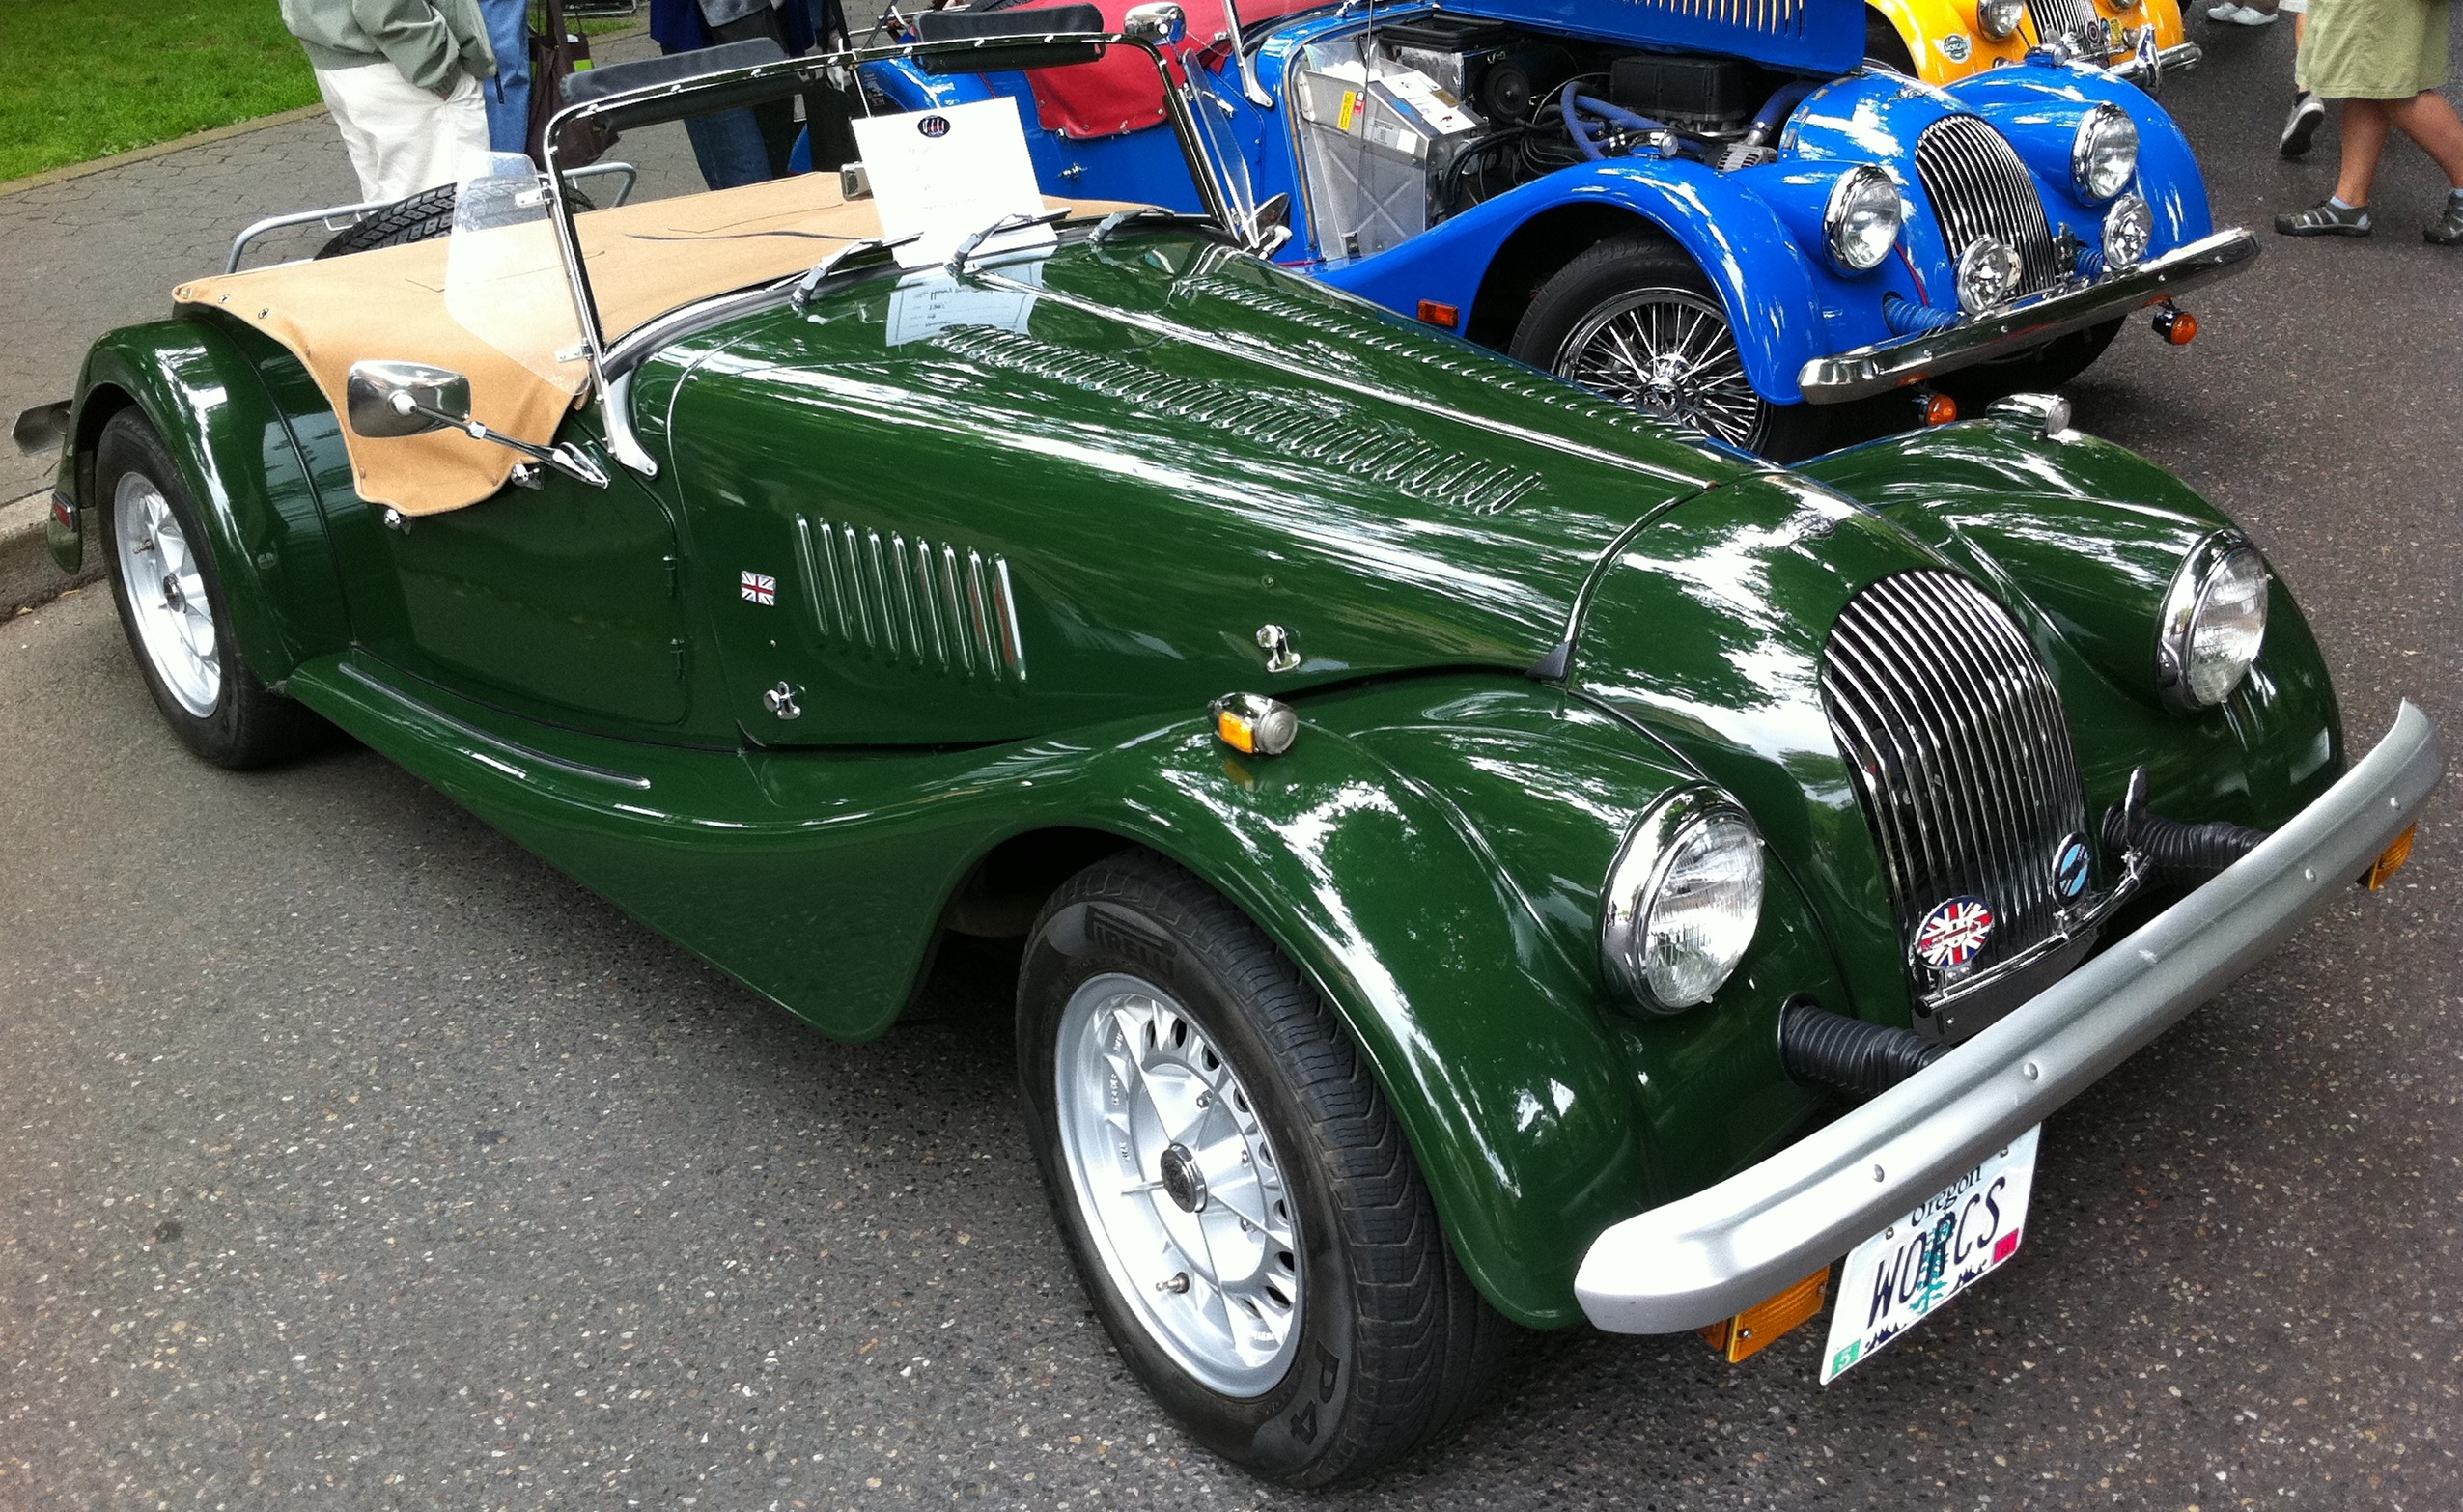 English Day at Cars in the Park | The Bridgetown Blog